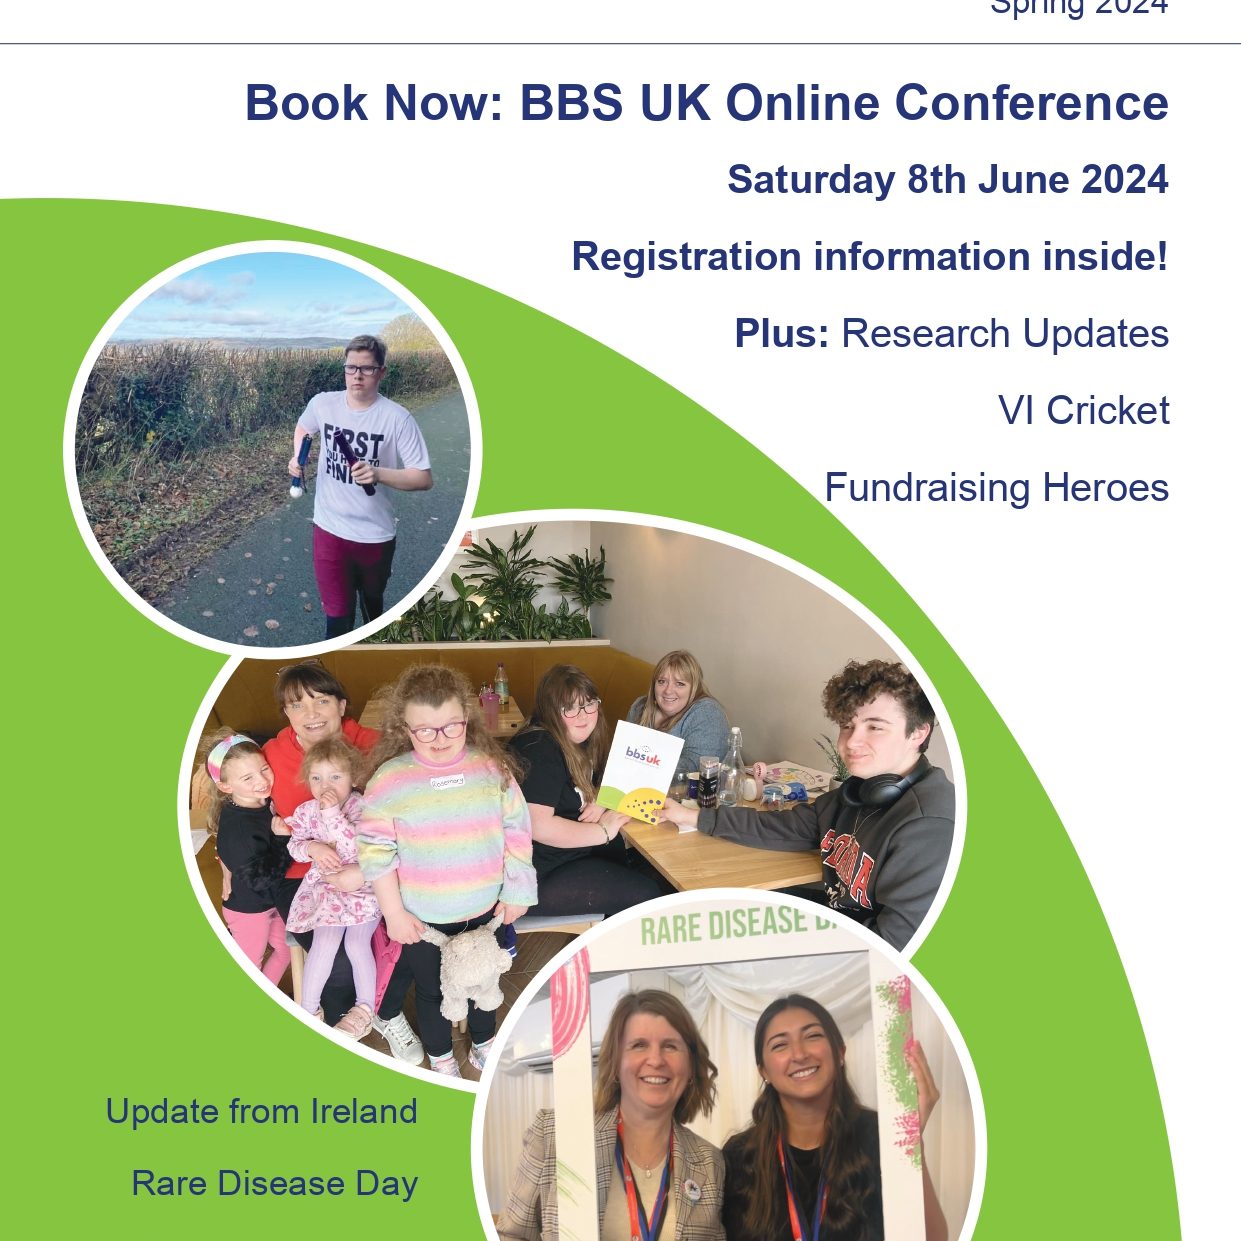 Front cover of the BBS UK Spring 2024 newsletter, with headlines of the articles included and three photos showing BBS UK service users and staff.